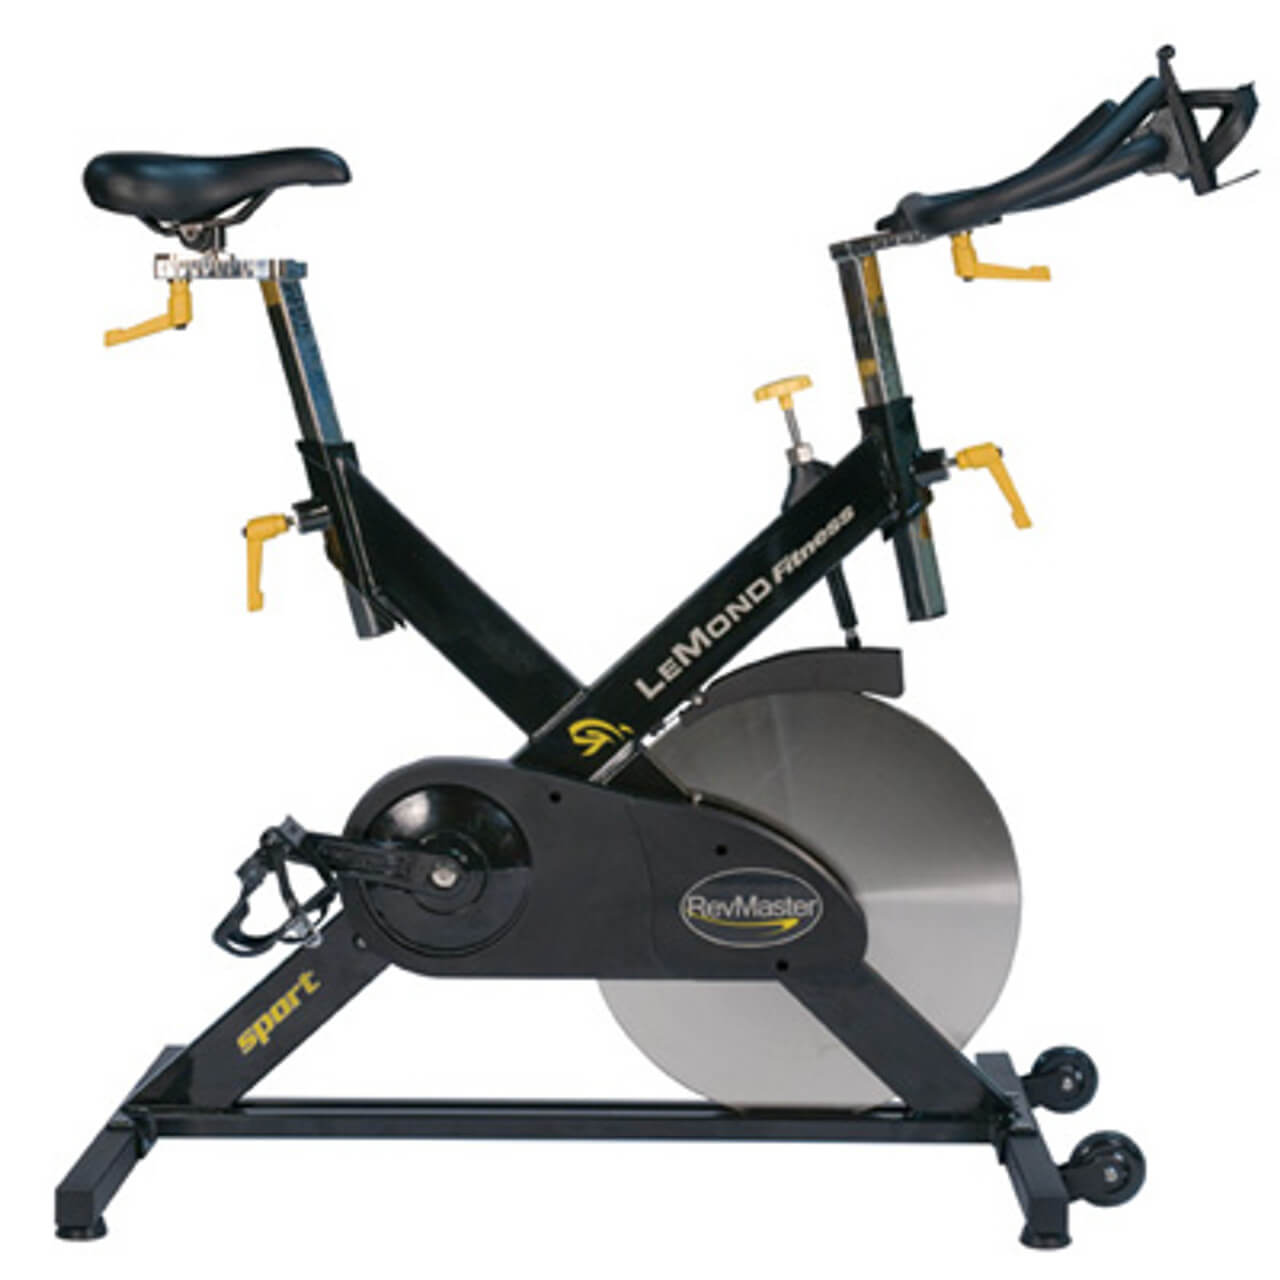 Lemond RevMaster Sport Indoor Cycling Bike -New . Call Now For Lowest Price